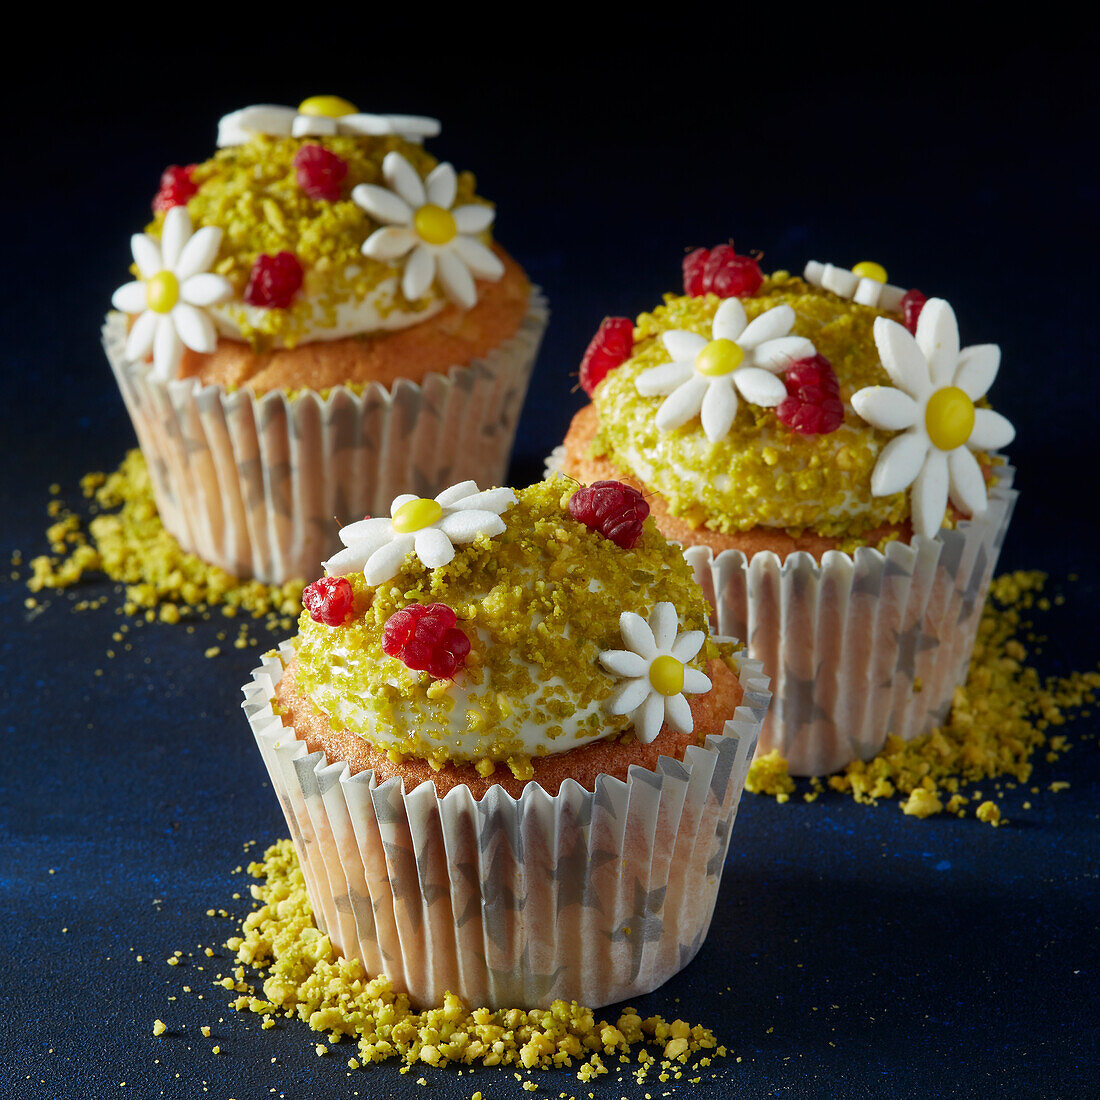 Cupcakes with pistachios and sugar daisies